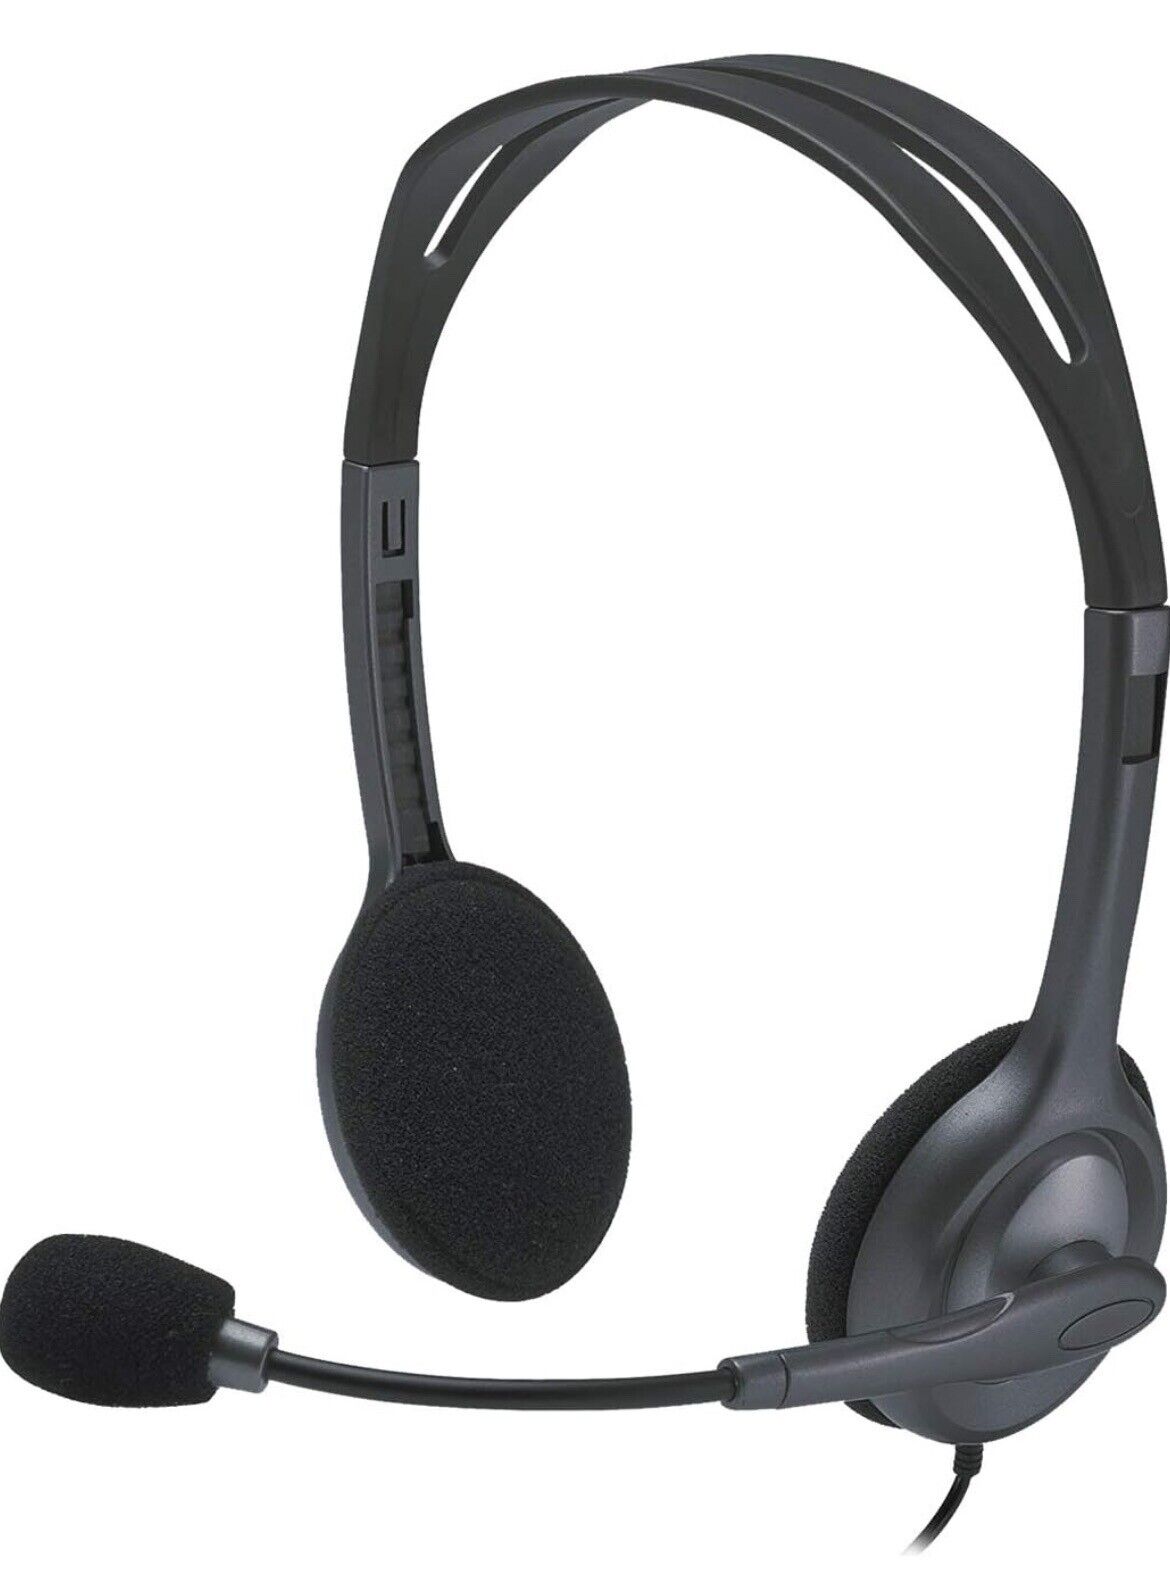 Logitech H111 Wired Headset, Stereo Headphones with Noise-Cancelling Microphone